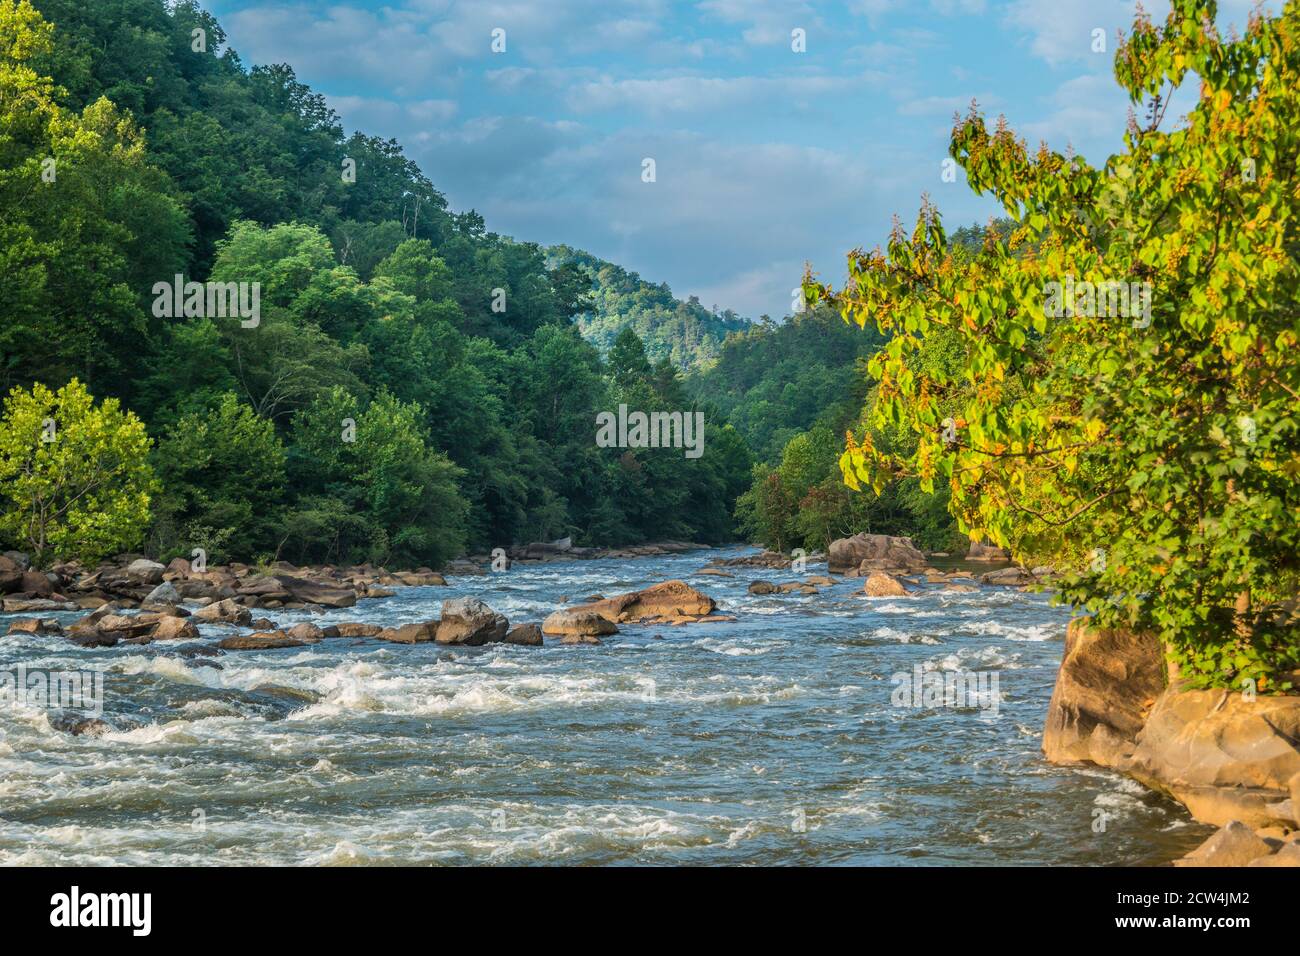 The Ocoee river in Tennessee with its whitewater flowing downstream closeup with the mist in the mountains in the background on a bright sunny day in Stock Photo